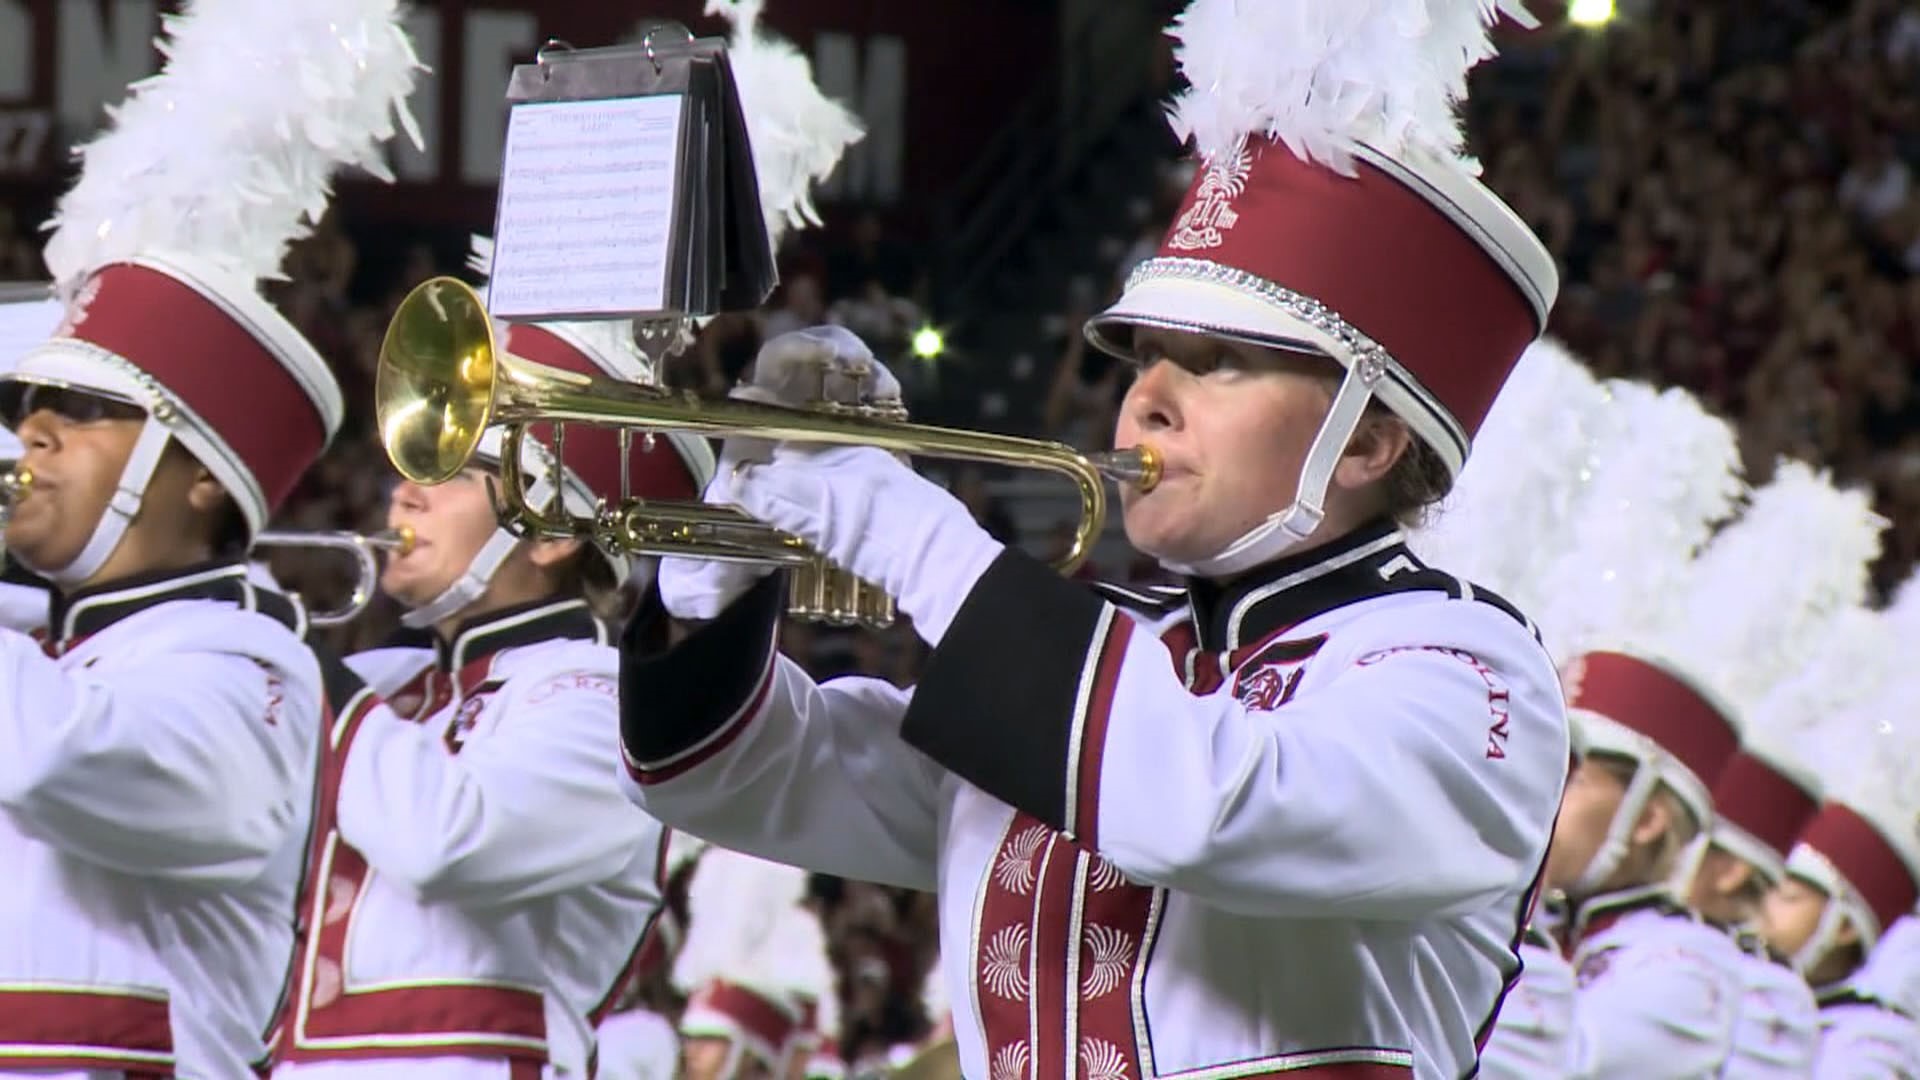 The South Carolina Gamecocks band is preparing for another season of entertaining USC football fans